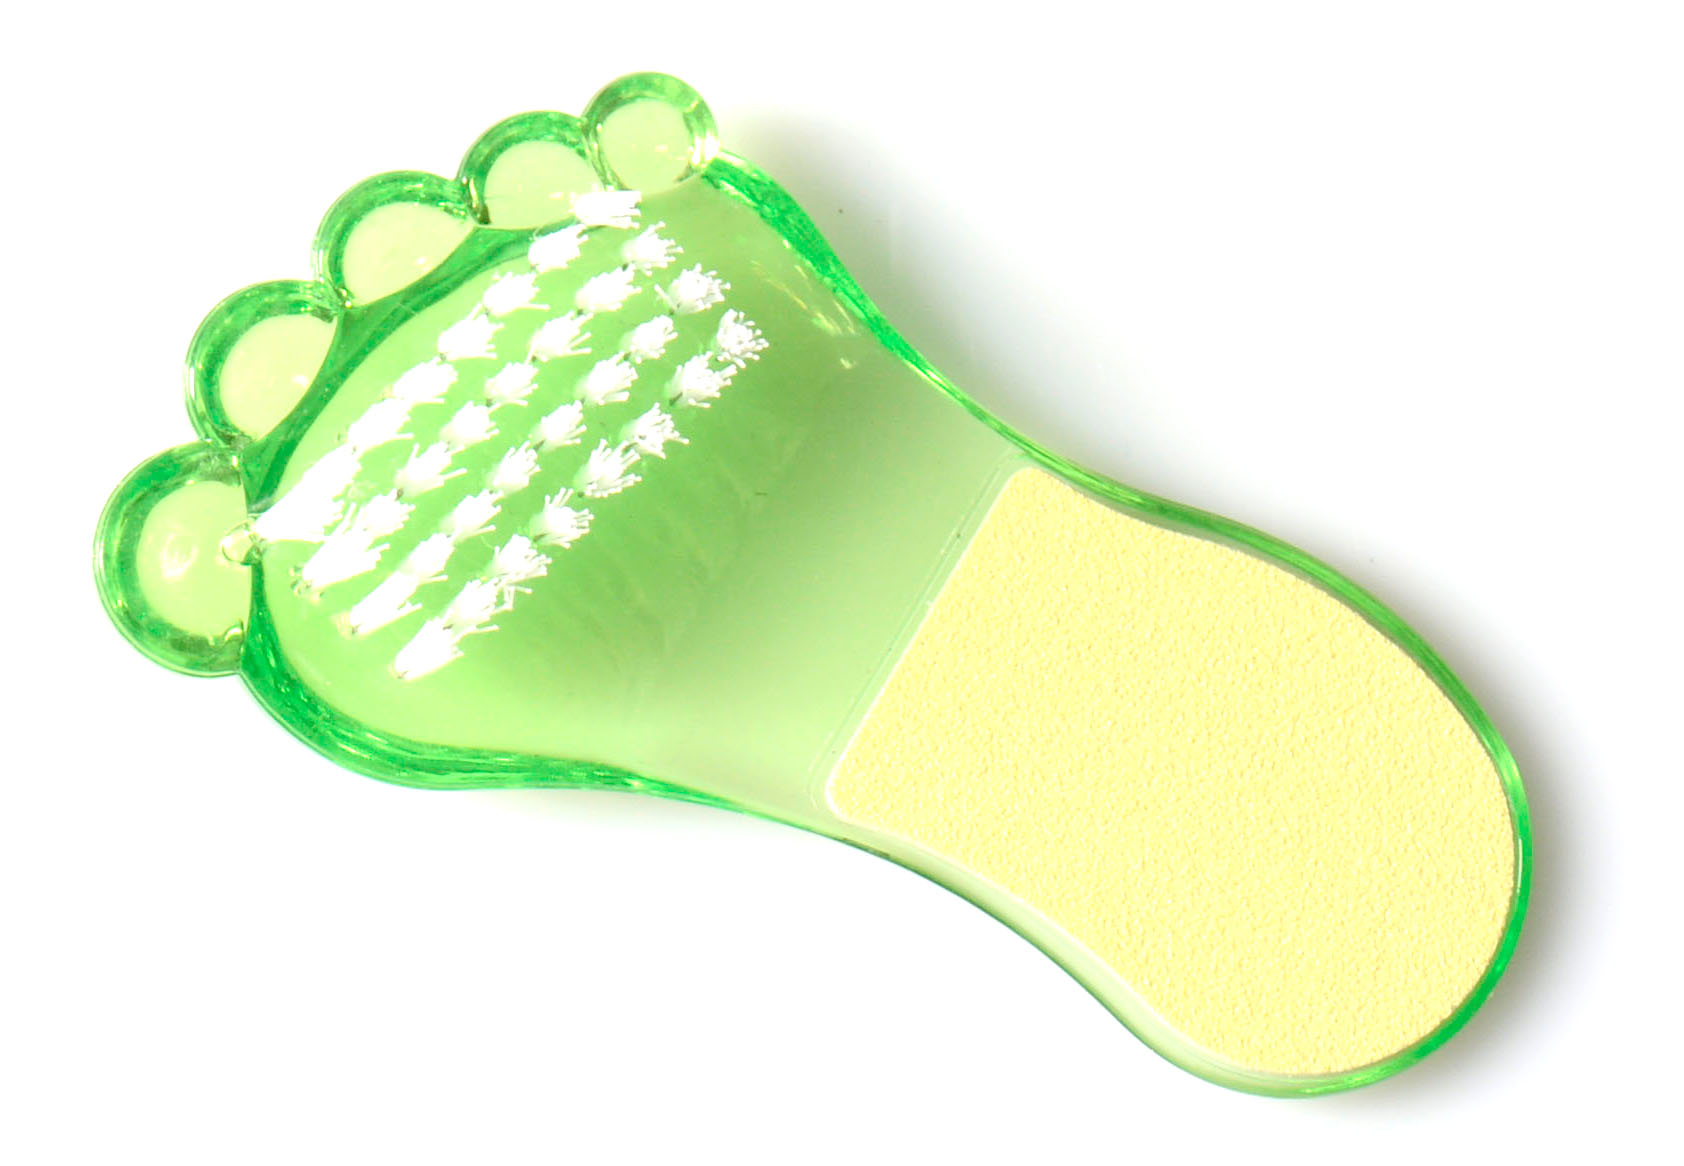 Excellent foot file and brush